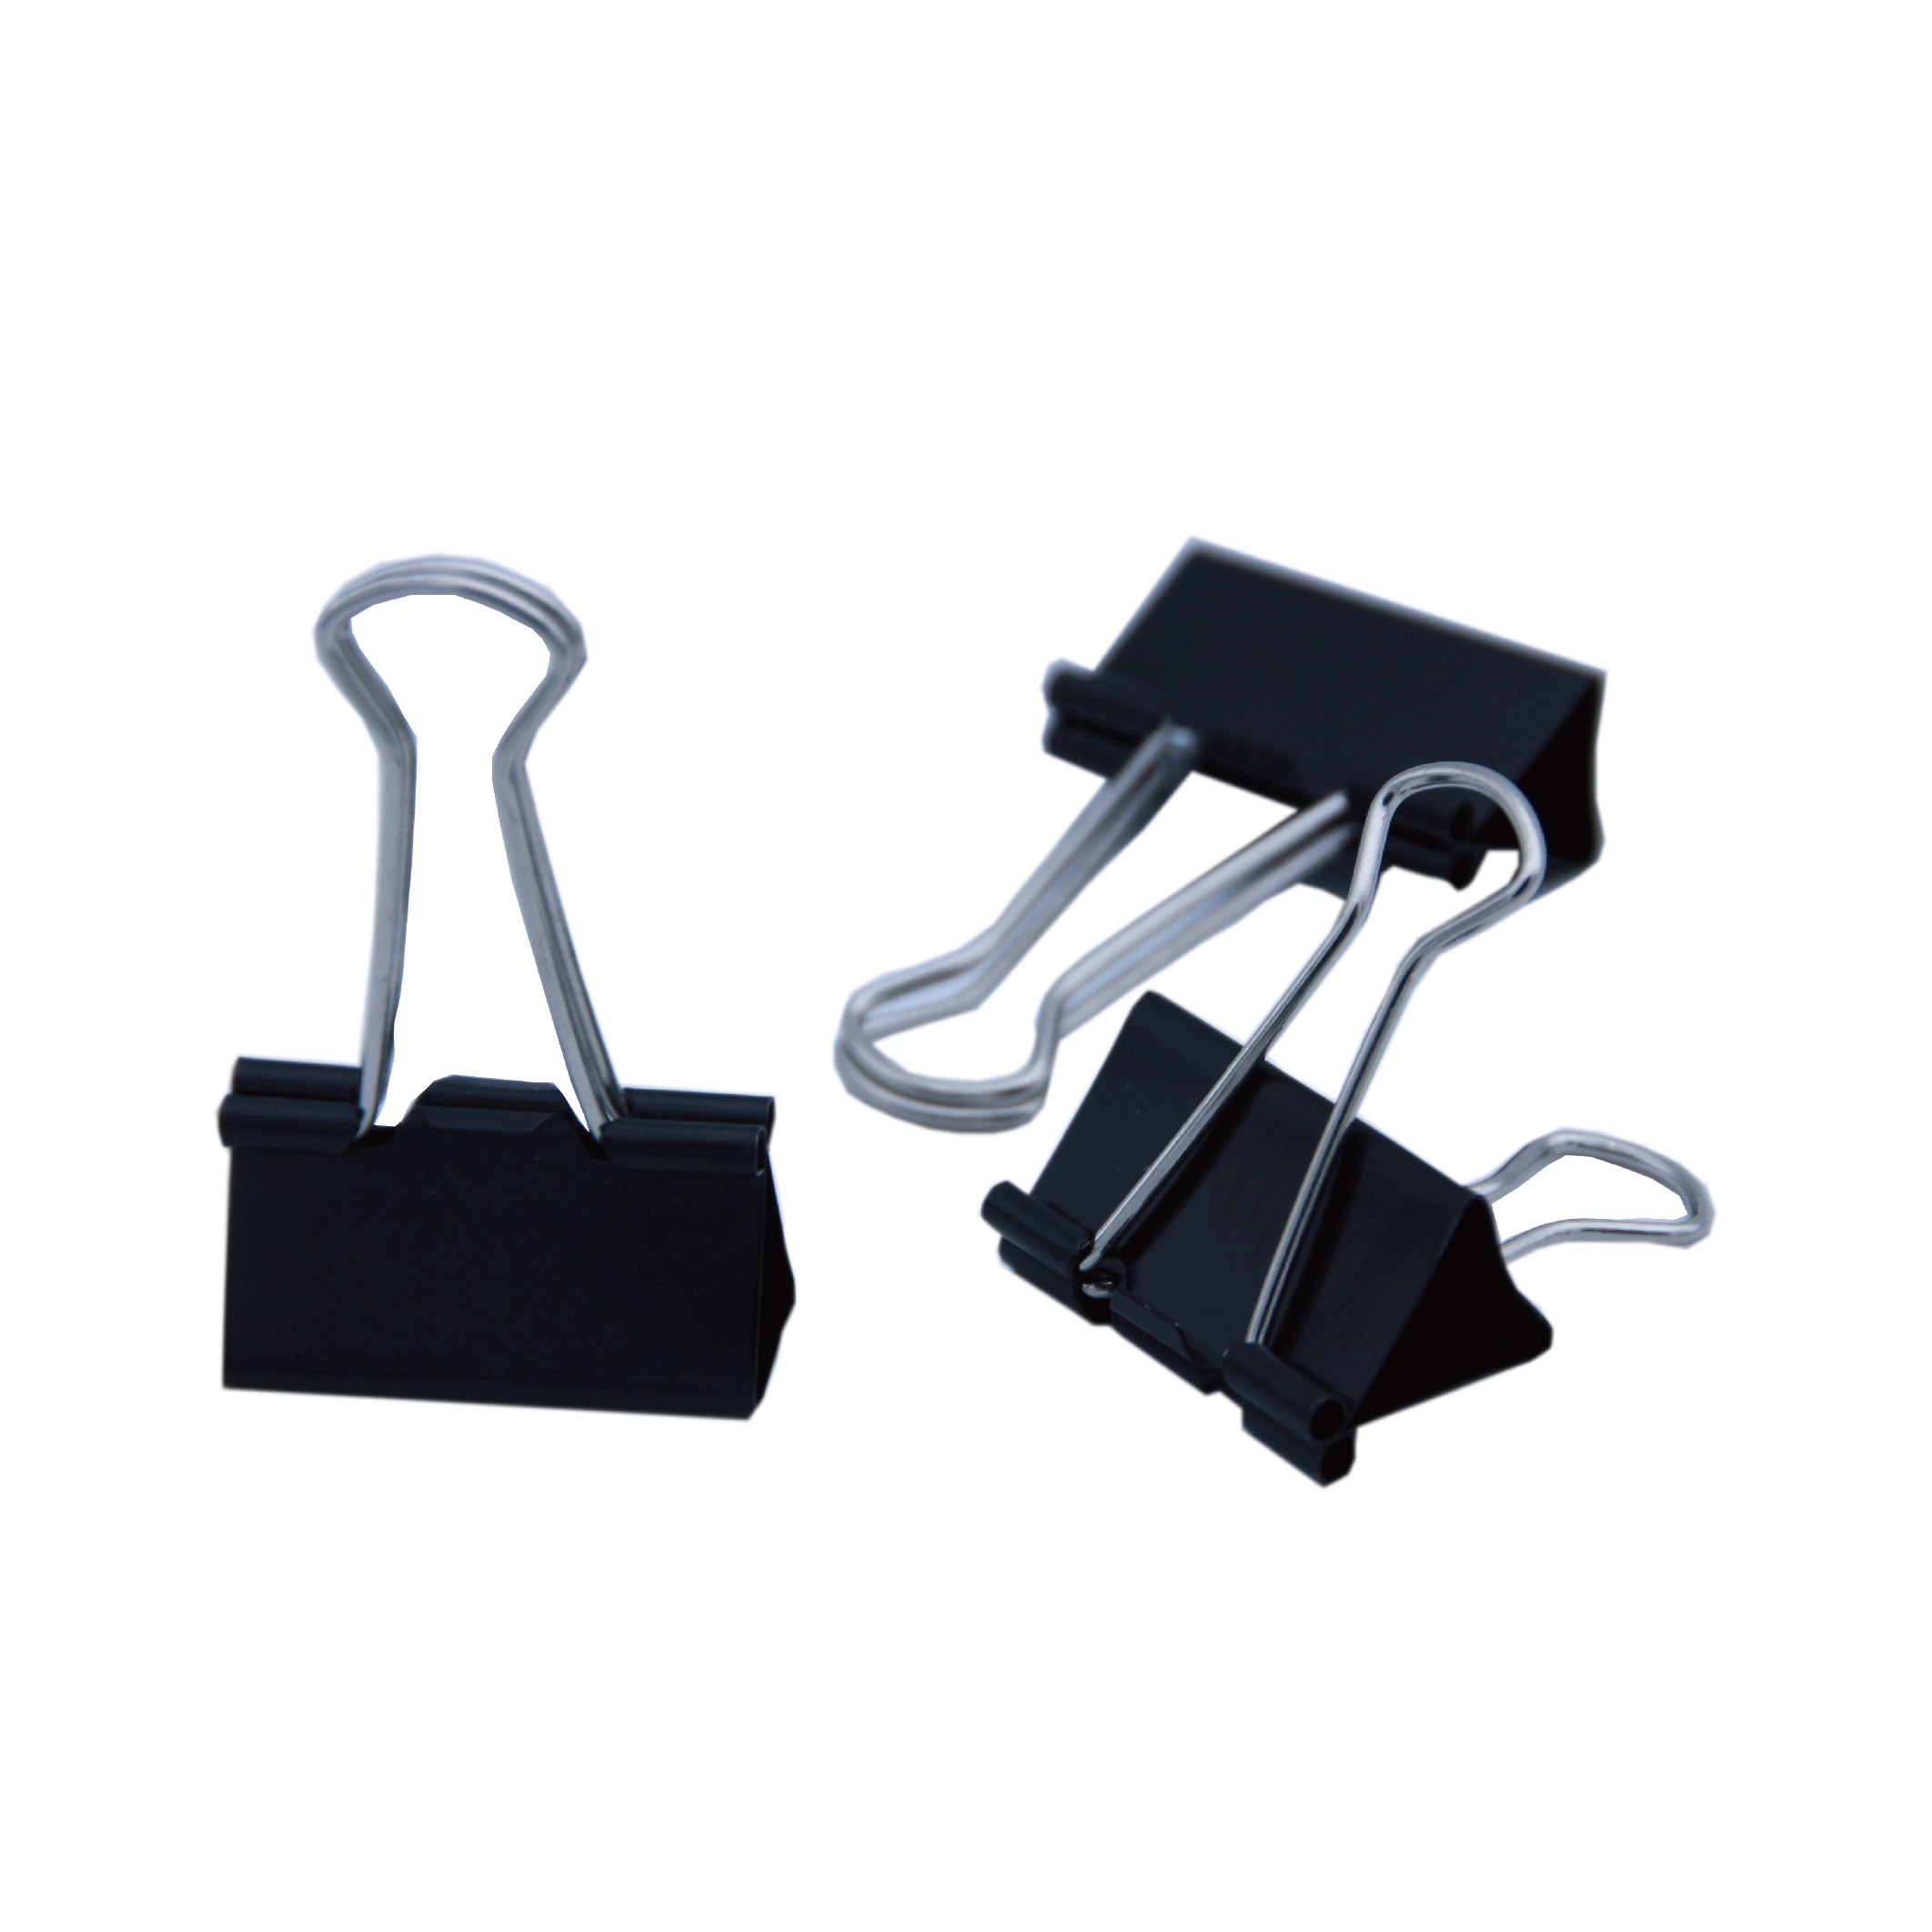 Binder Clip 25mm(1"width) black and colour 